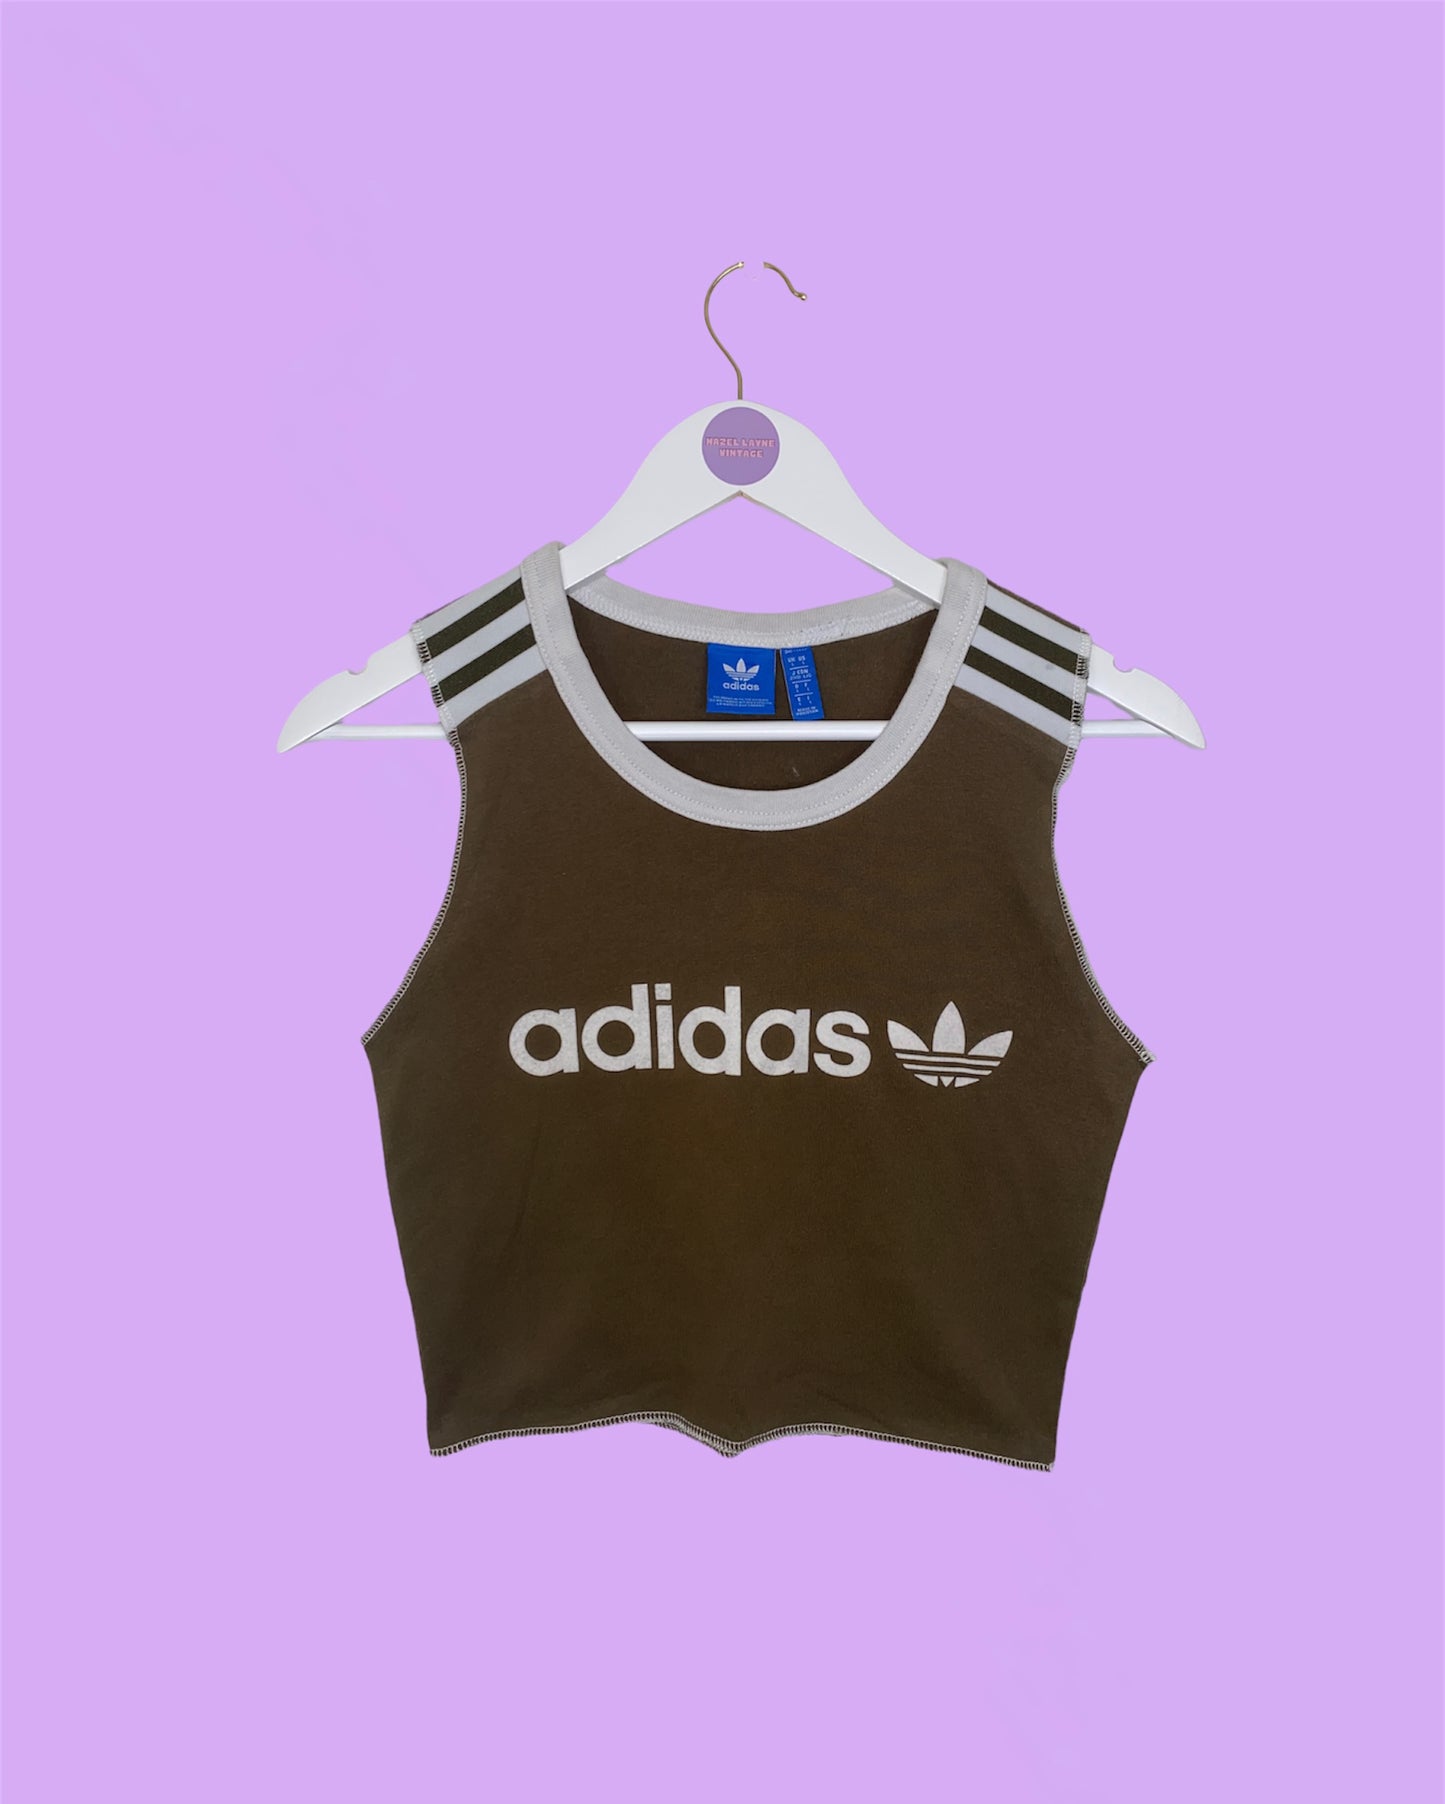 khaki sleeveless crop top with white adidas logo shown on a white clothes hanger on a lilac background